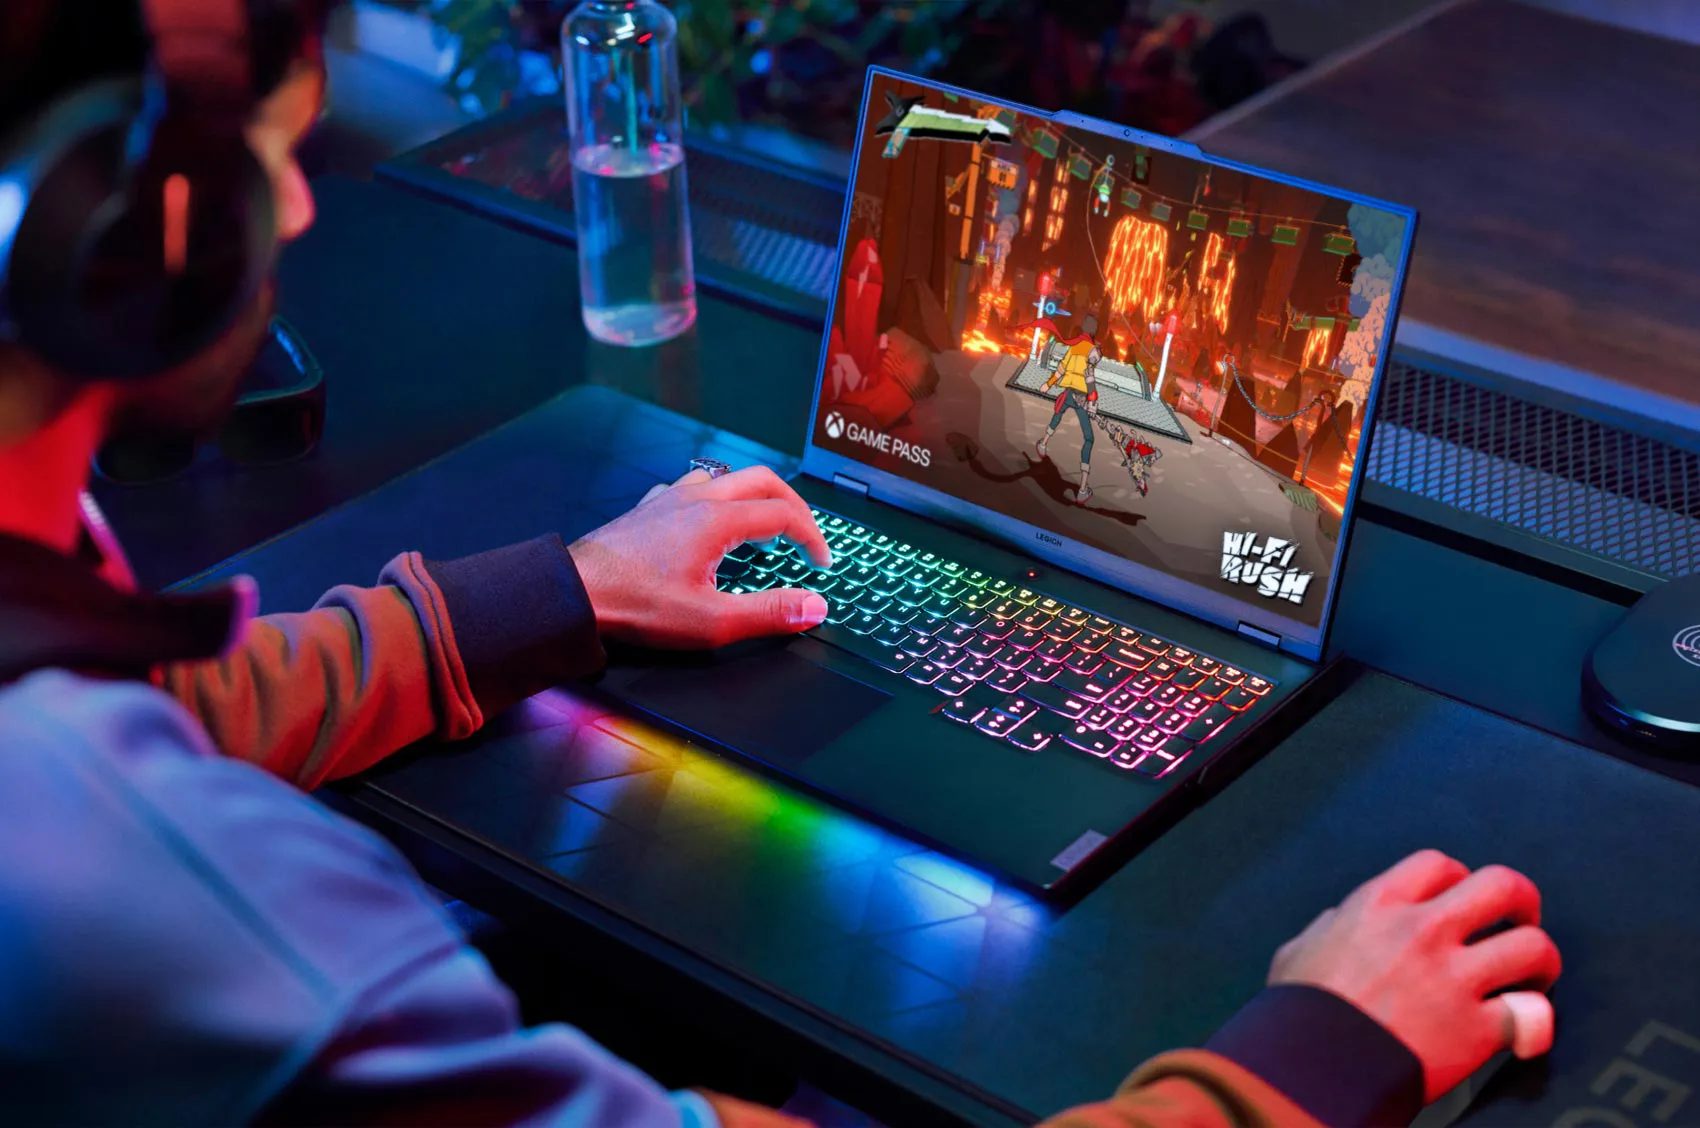 An over-the-shoulder view of a man playing first person action game on a Legion laptop.